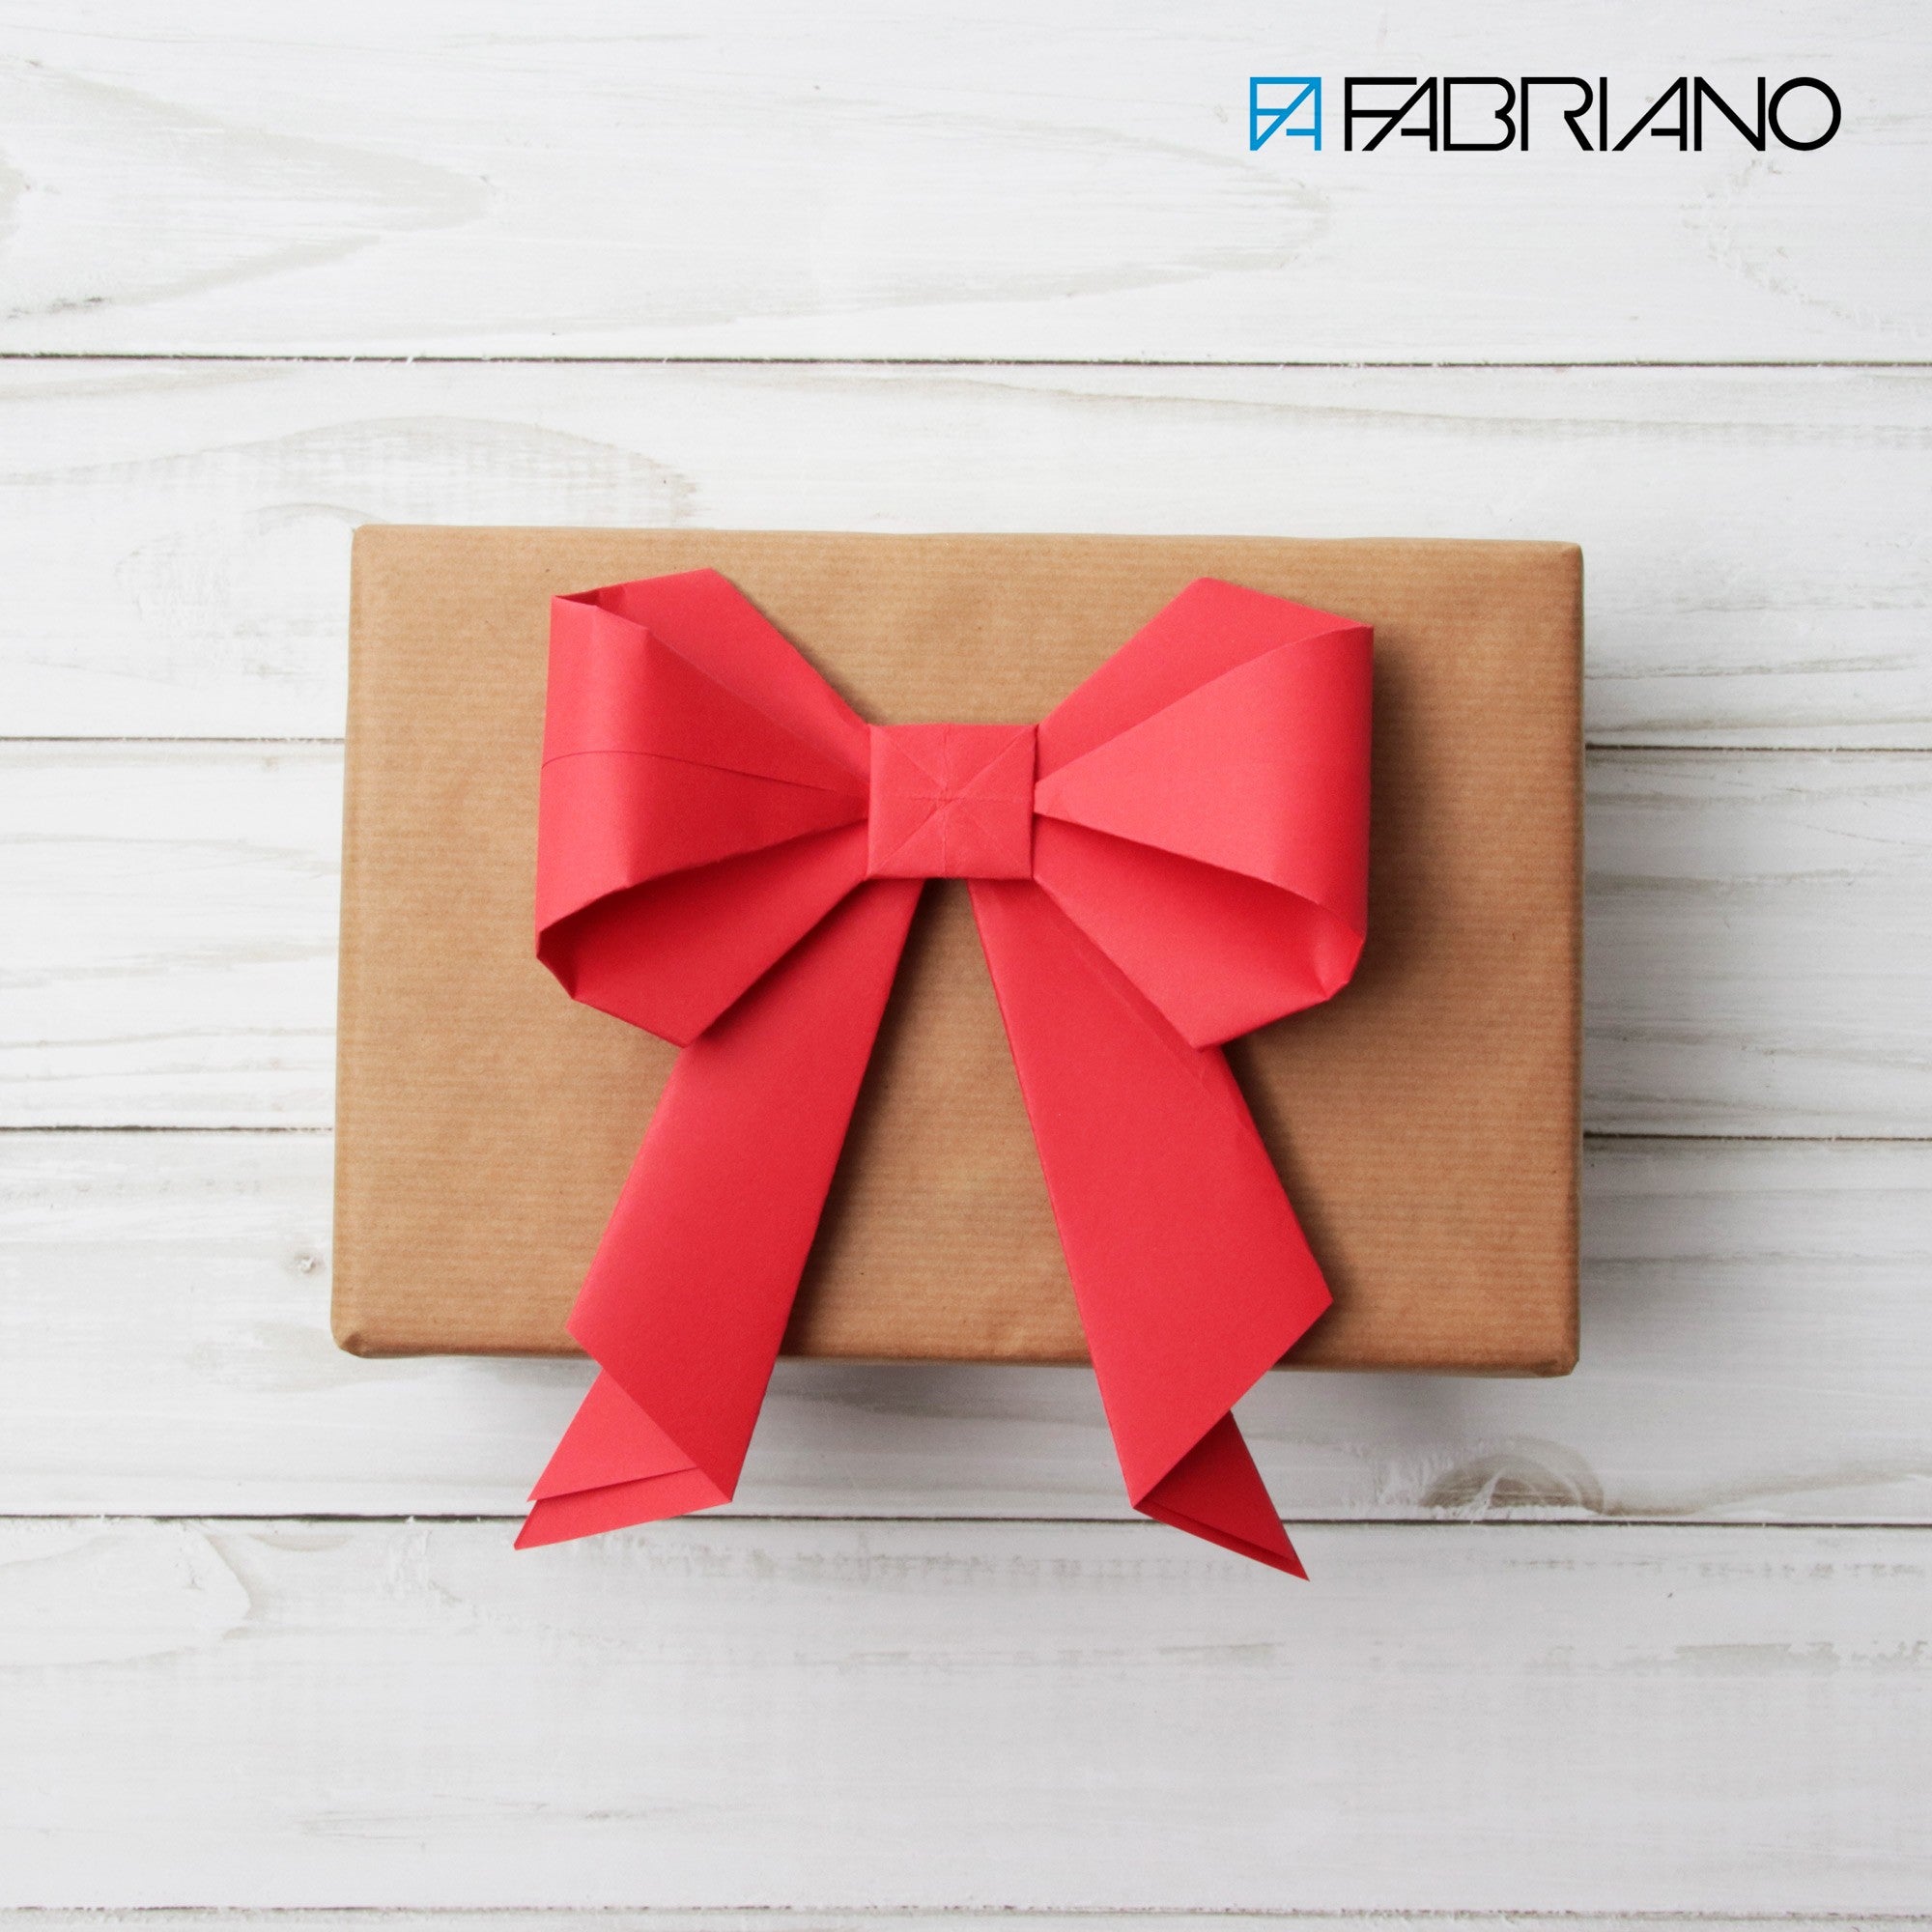 Origami Bow presented by Fabriano